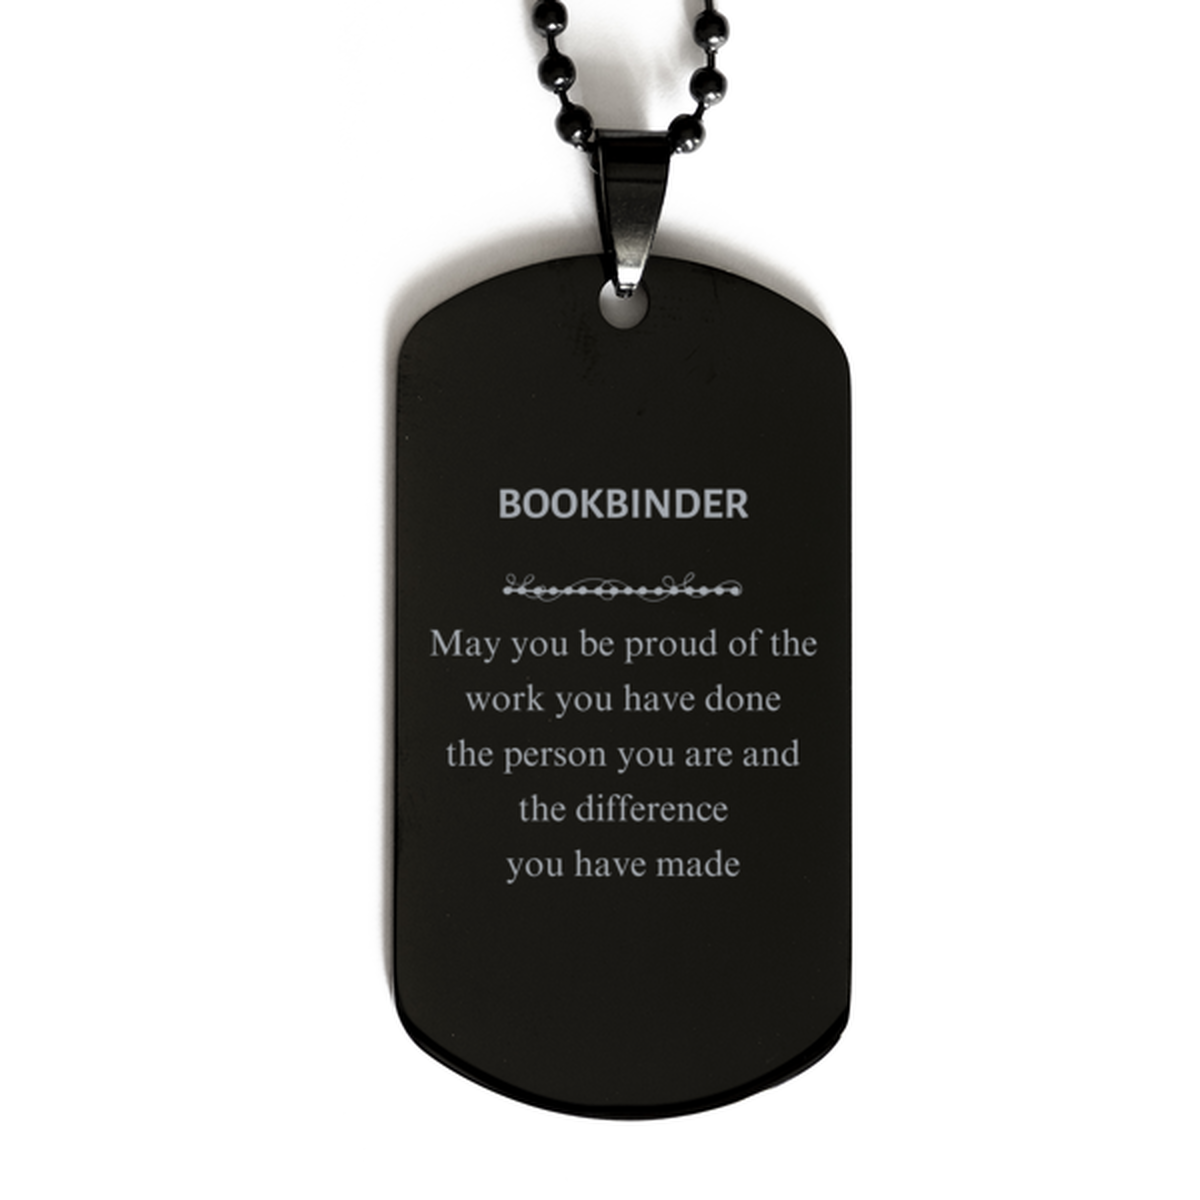 Bookbinder May you be proud of the work you have done, Retirement Bookbinder Black Dog Tag for Colleague Appreciation Gifts Amazing for Bookbinder